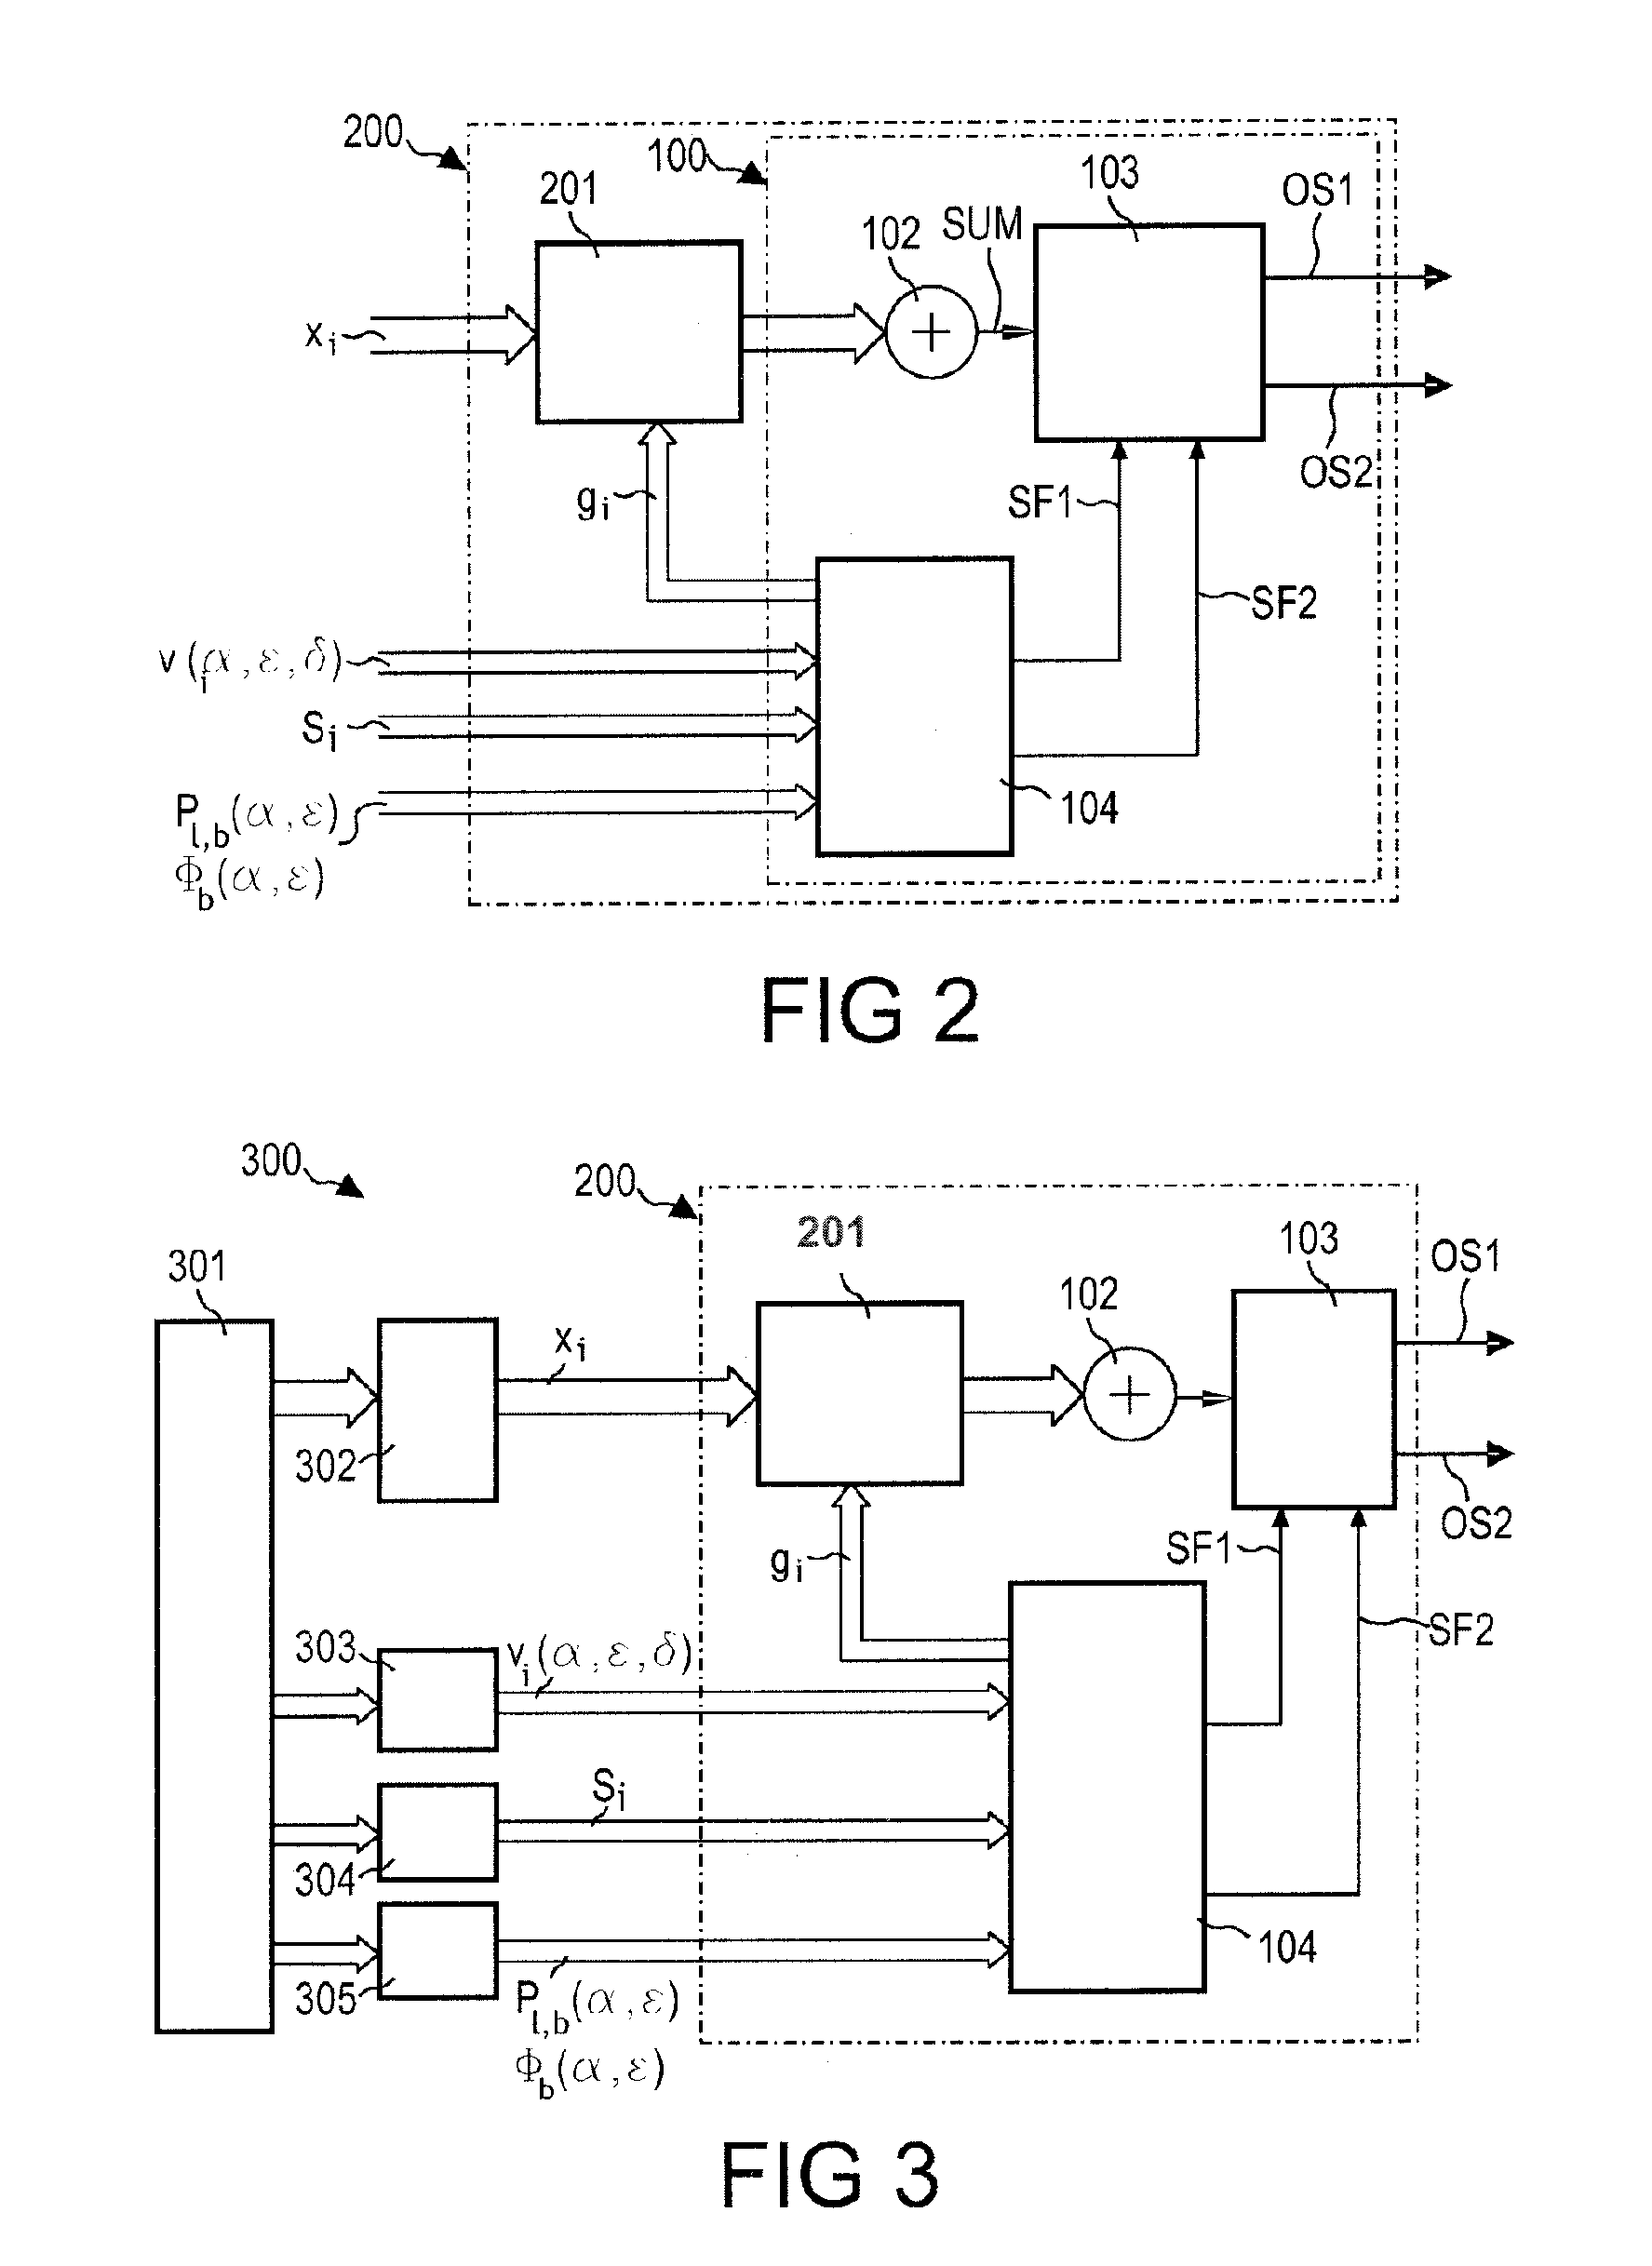 Method of and device for generating and processing parameters representing HRTFs